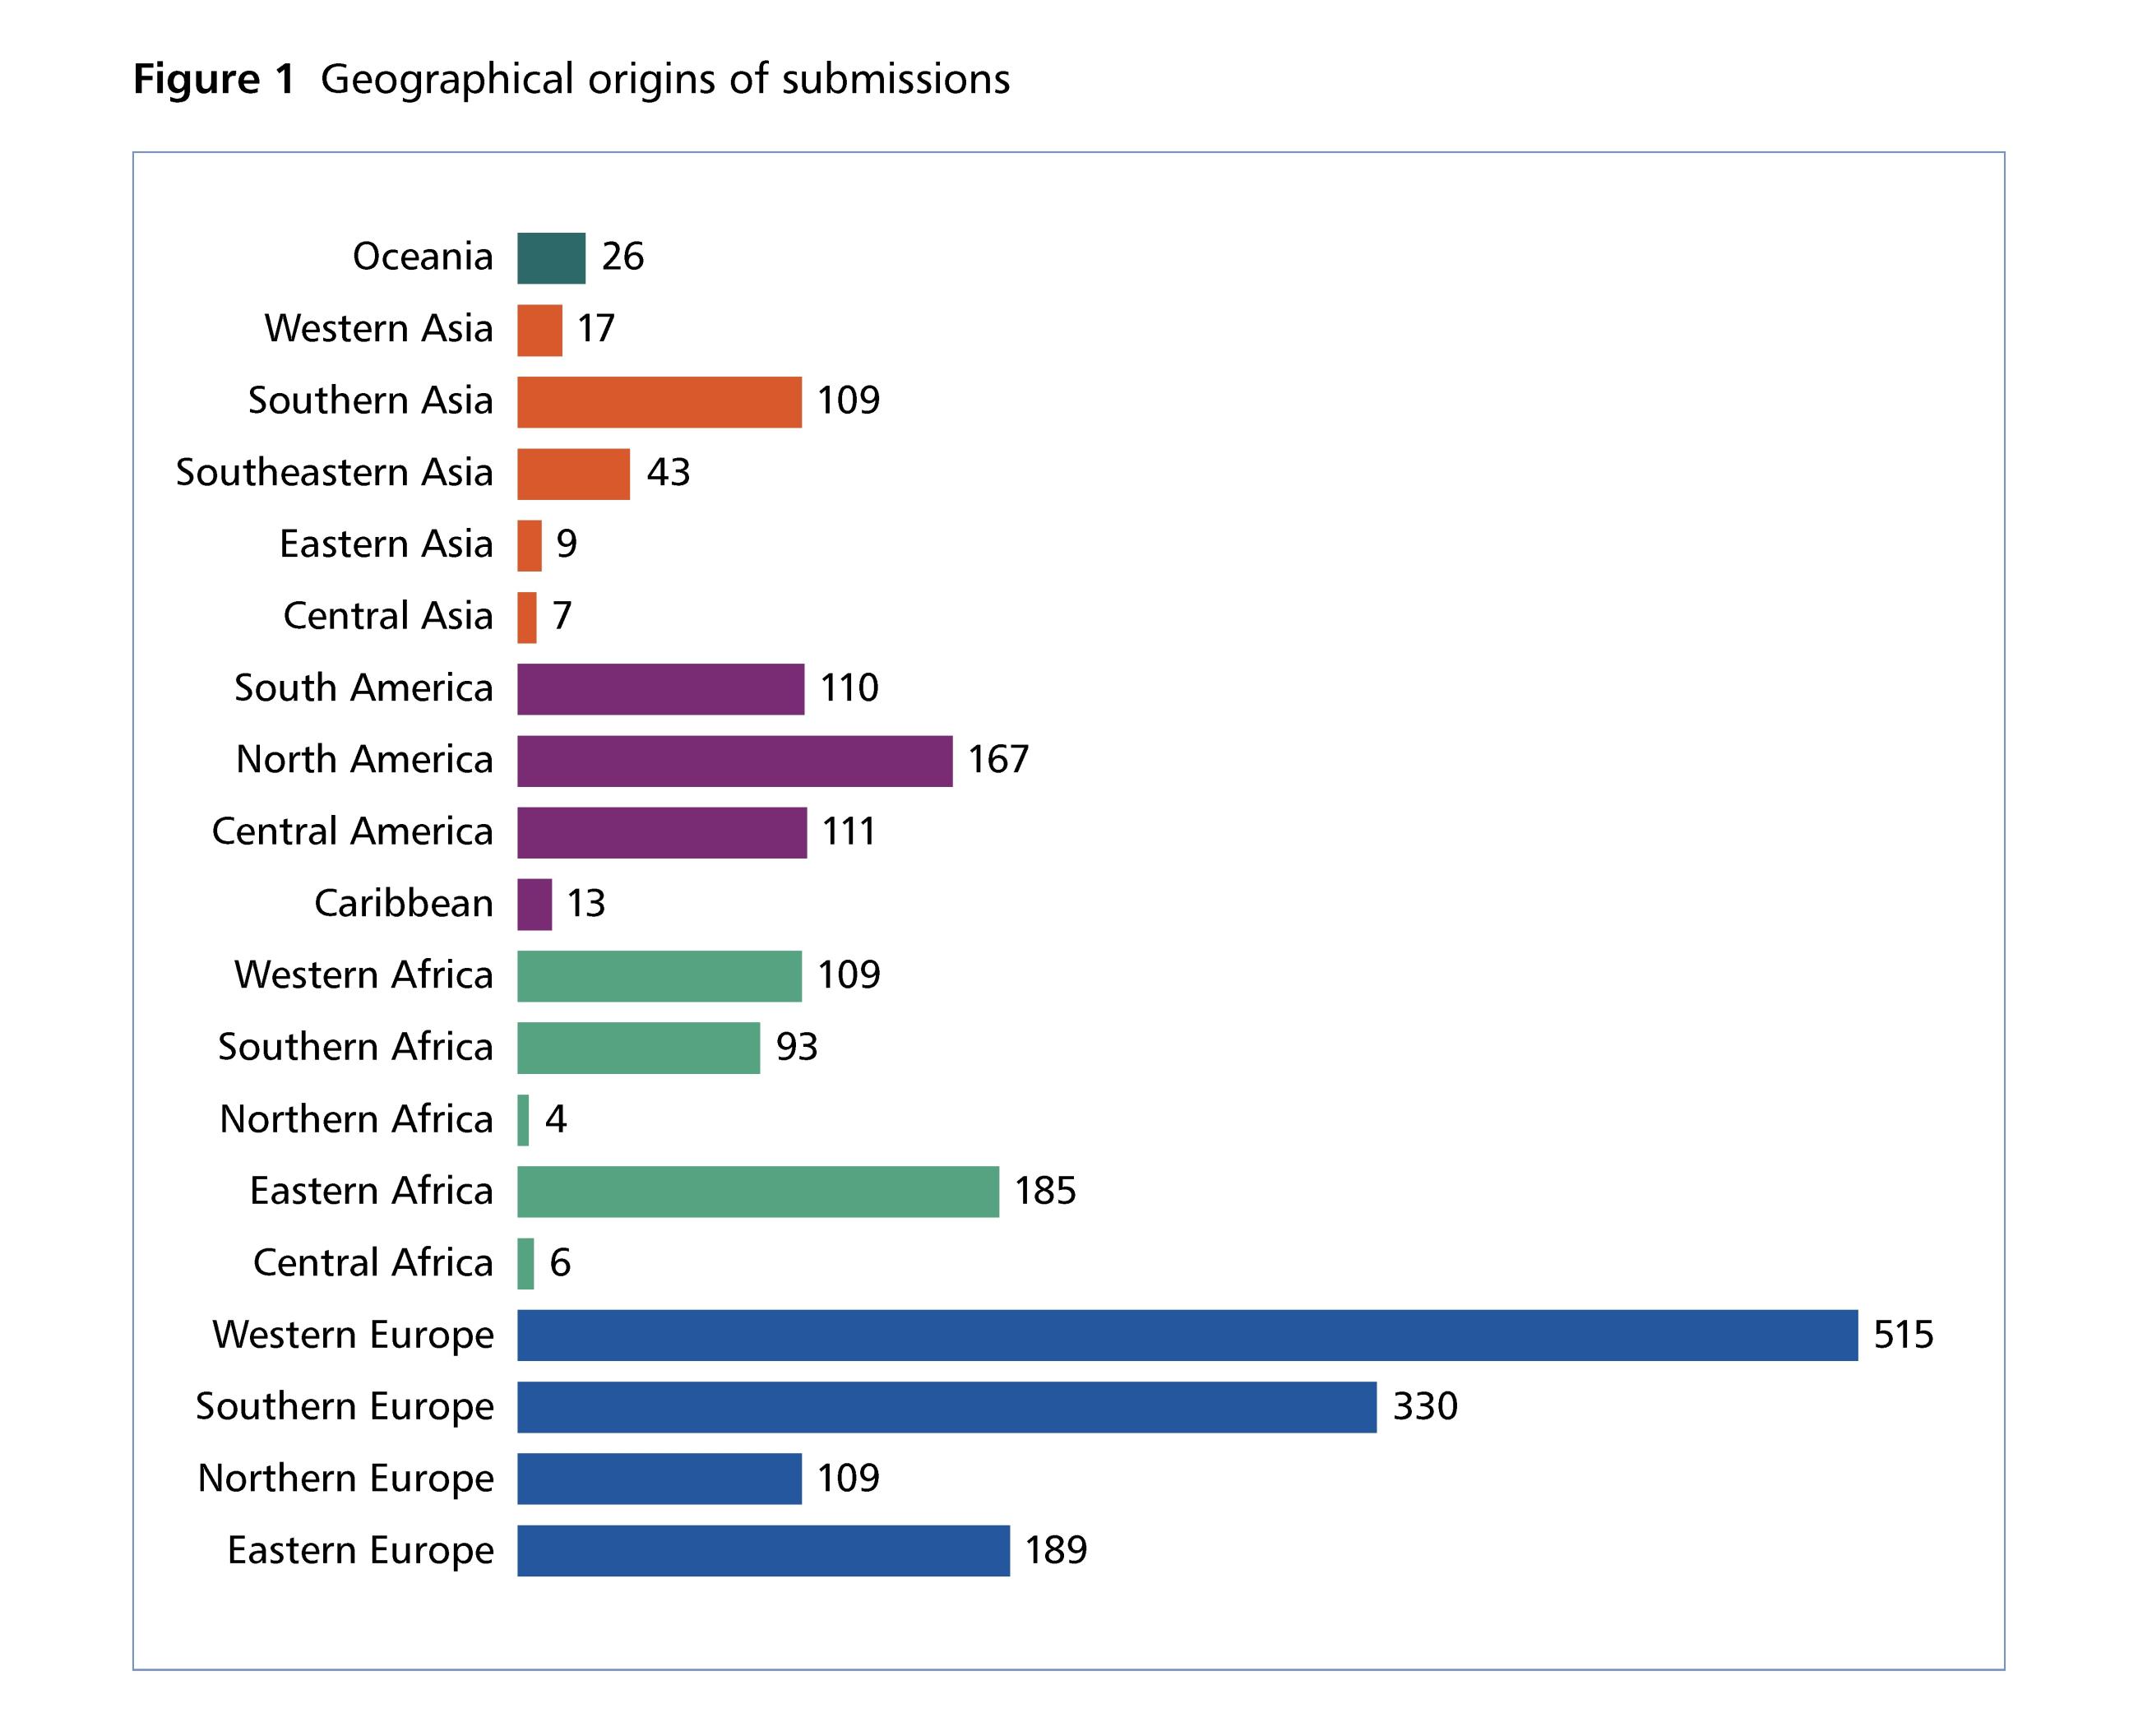 bar graph of geographical origins of submissions